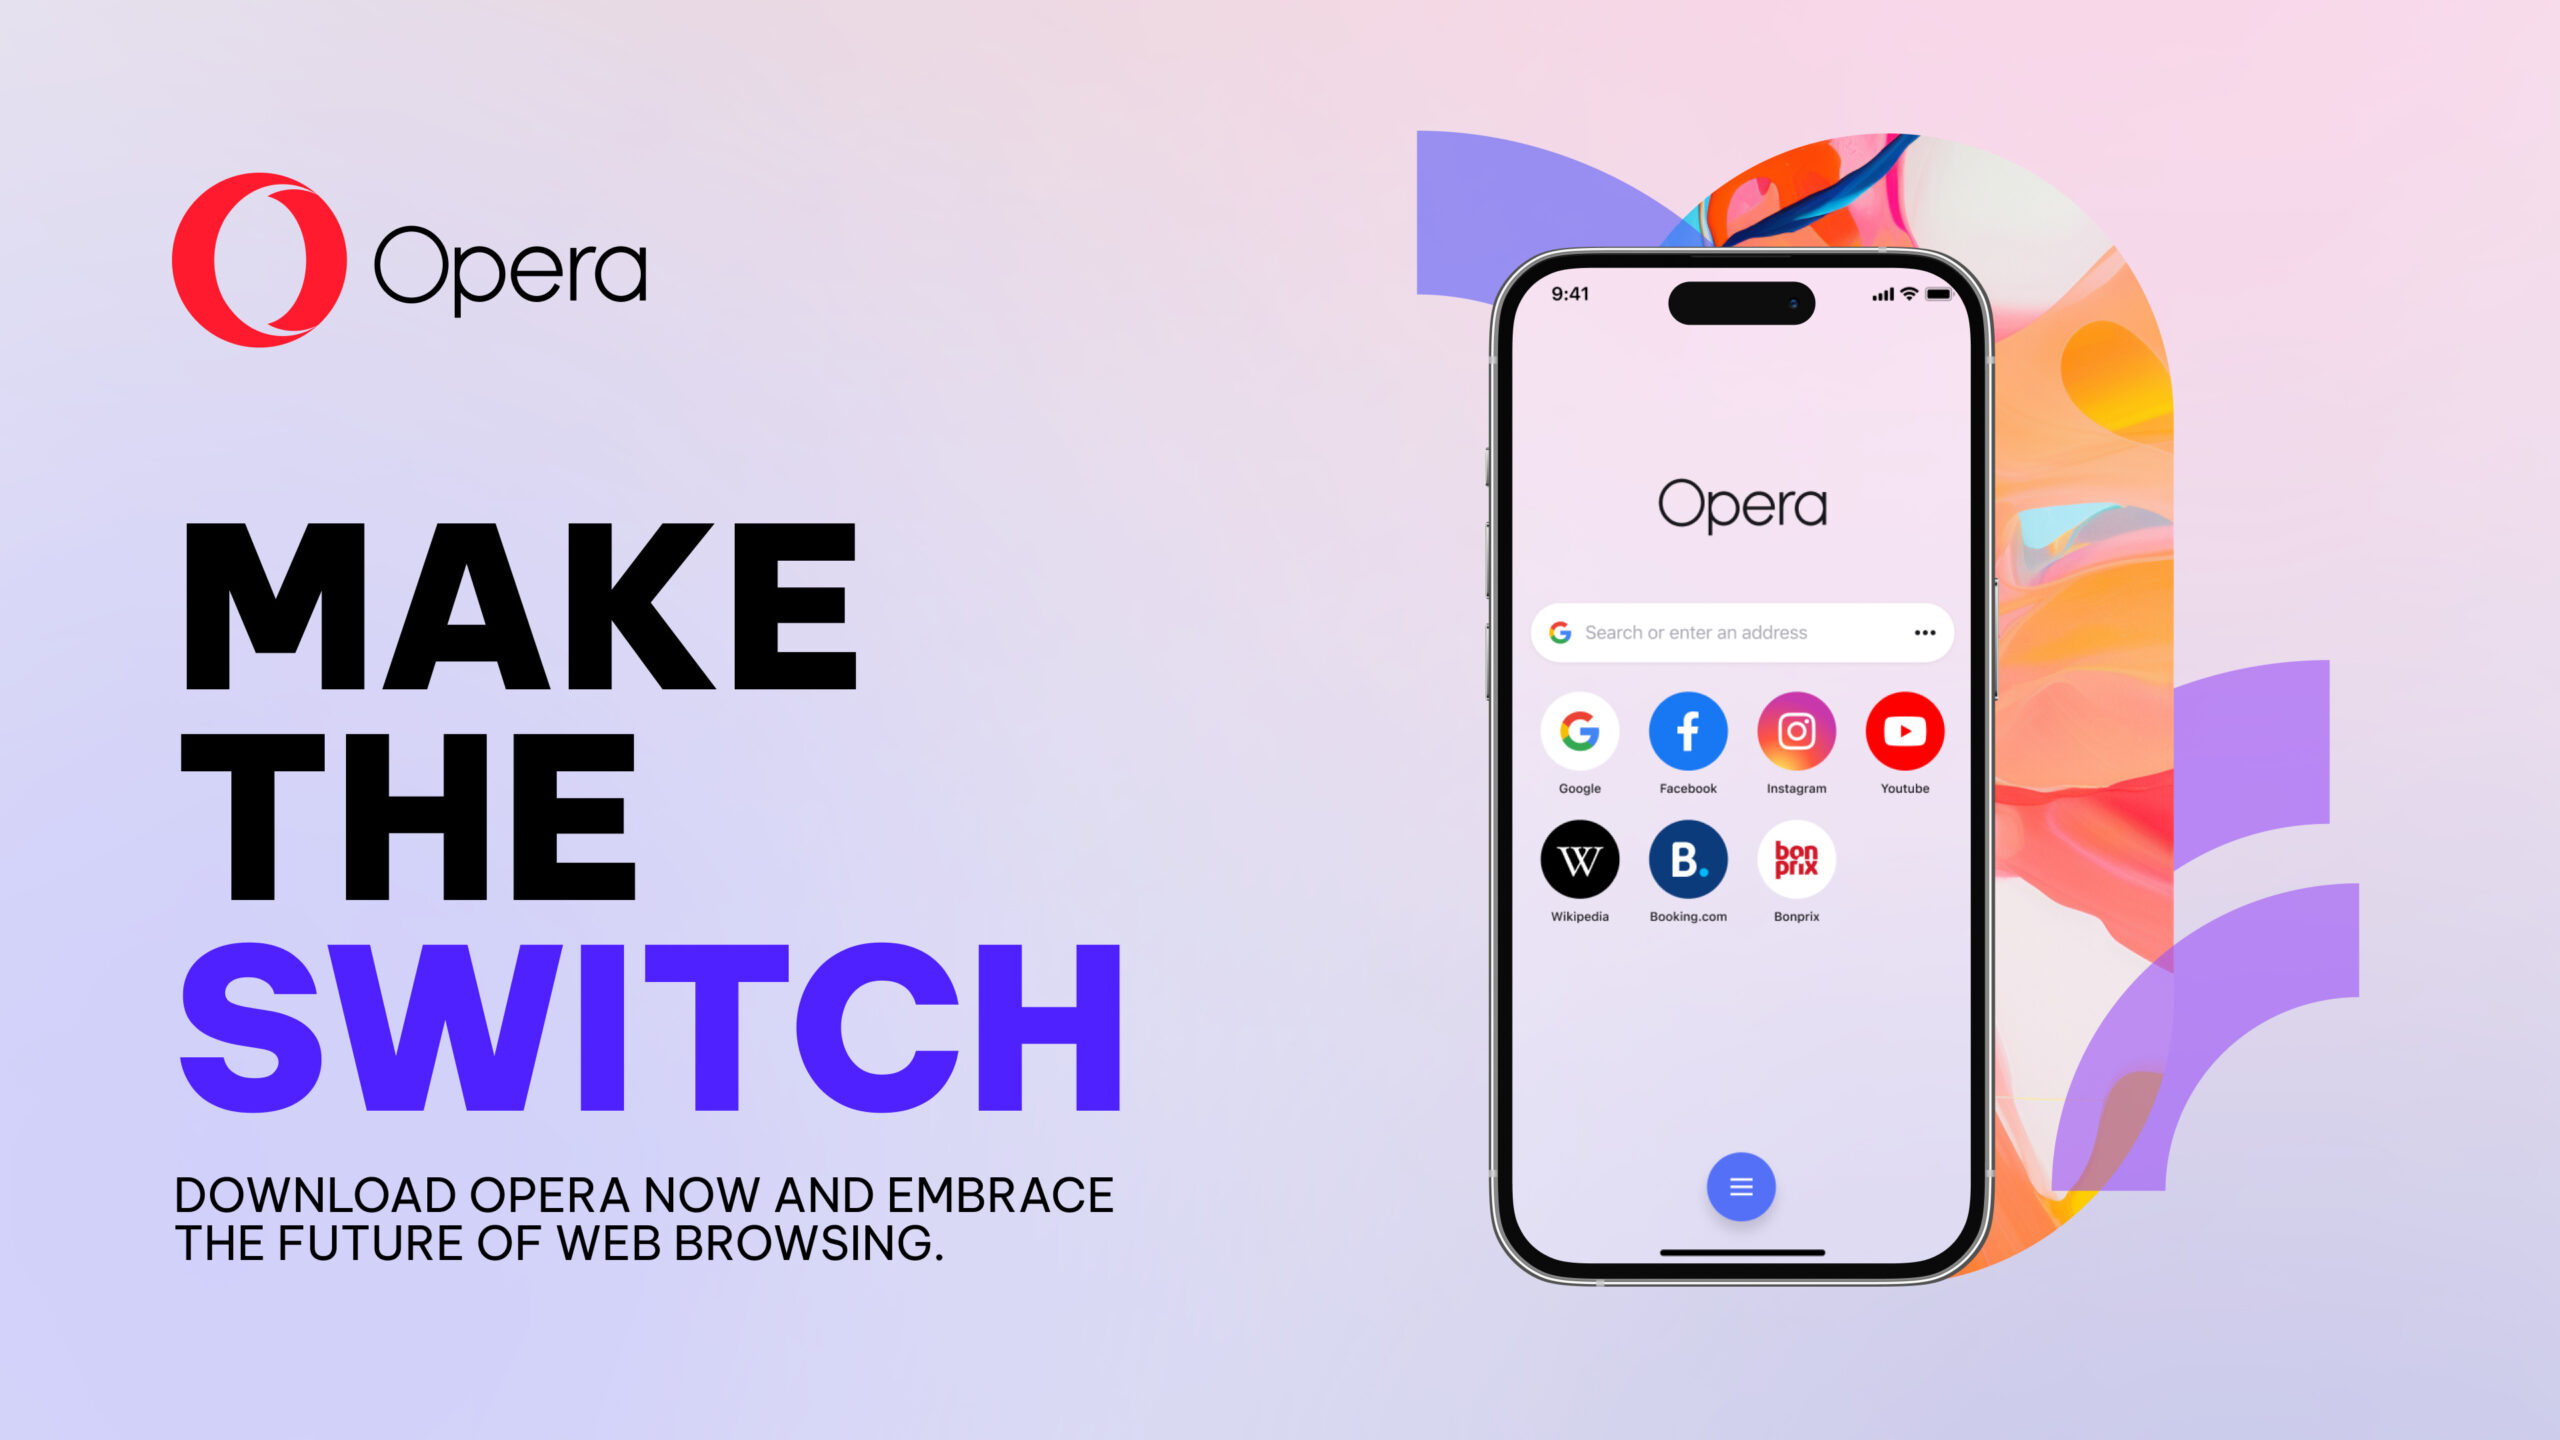 Make a switch title with Opera Browser in a smartphone on a purple background